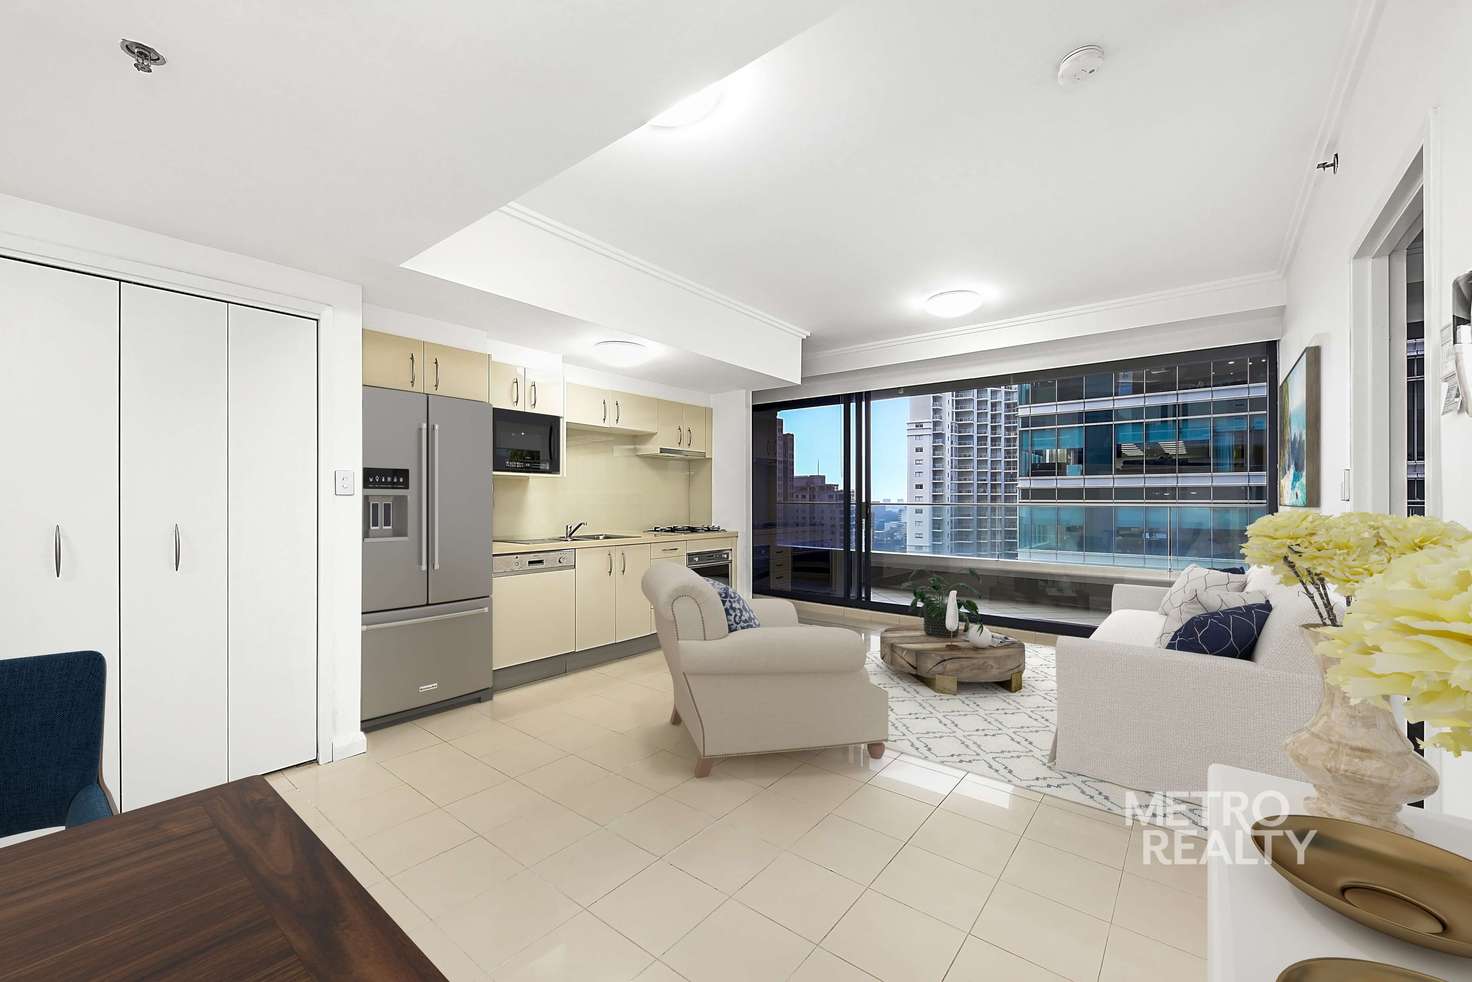 Main view of Homely apartment listing, 3403/91 Liverpool St, Sydney NSW 2000